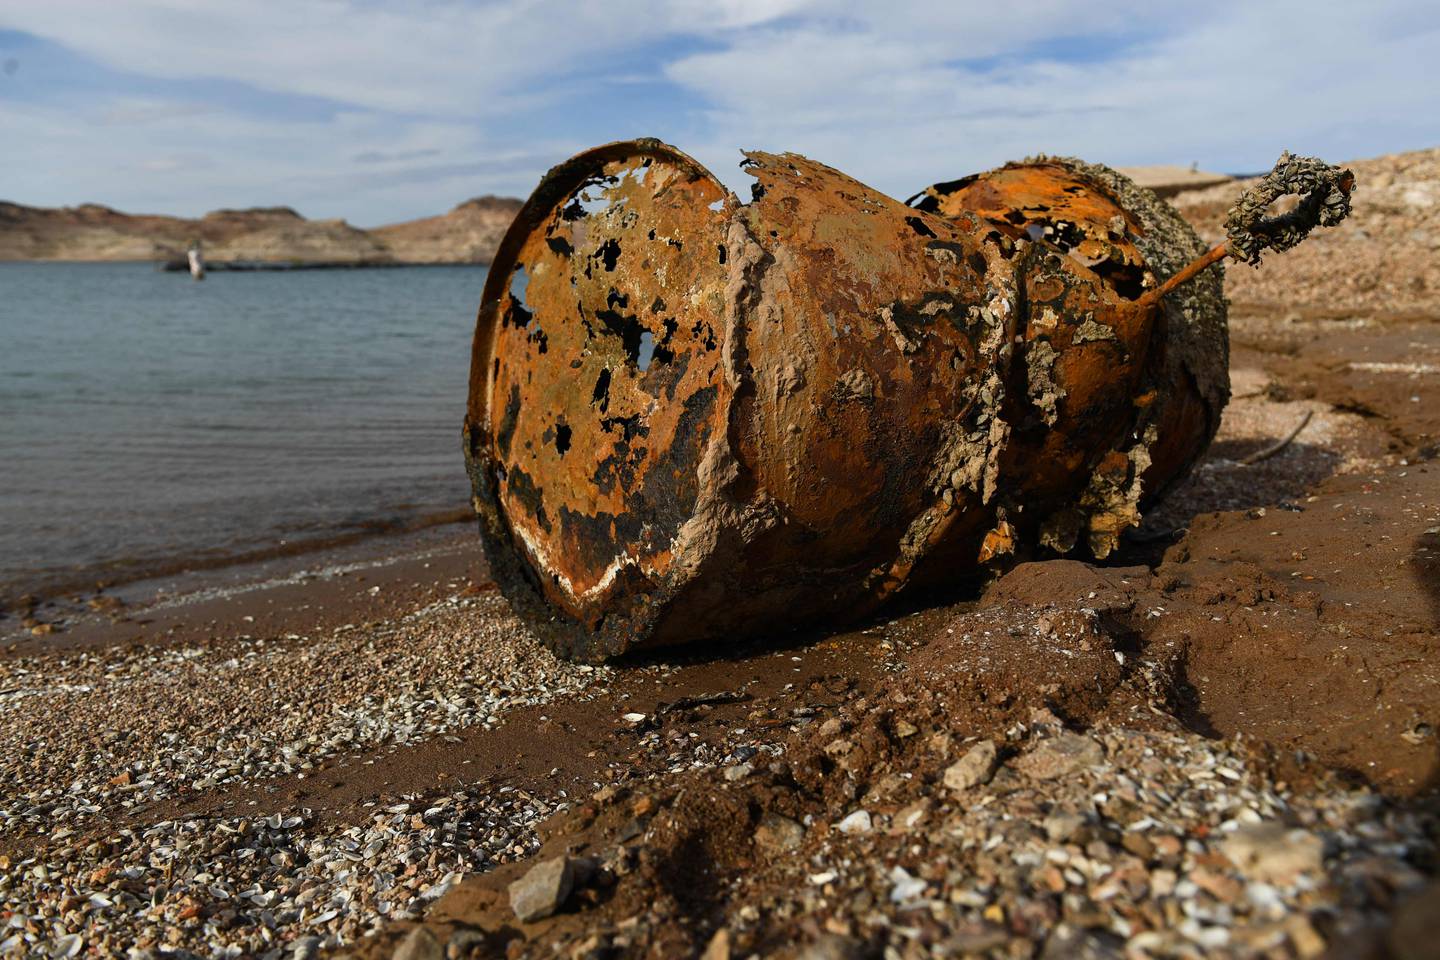 A rusted metal barrel, near the location of where a different barrel was found containing a human body, sits exposed on shore during low water levels due to the western drought at the Lake Mead Marina on the Colorado River. AFP